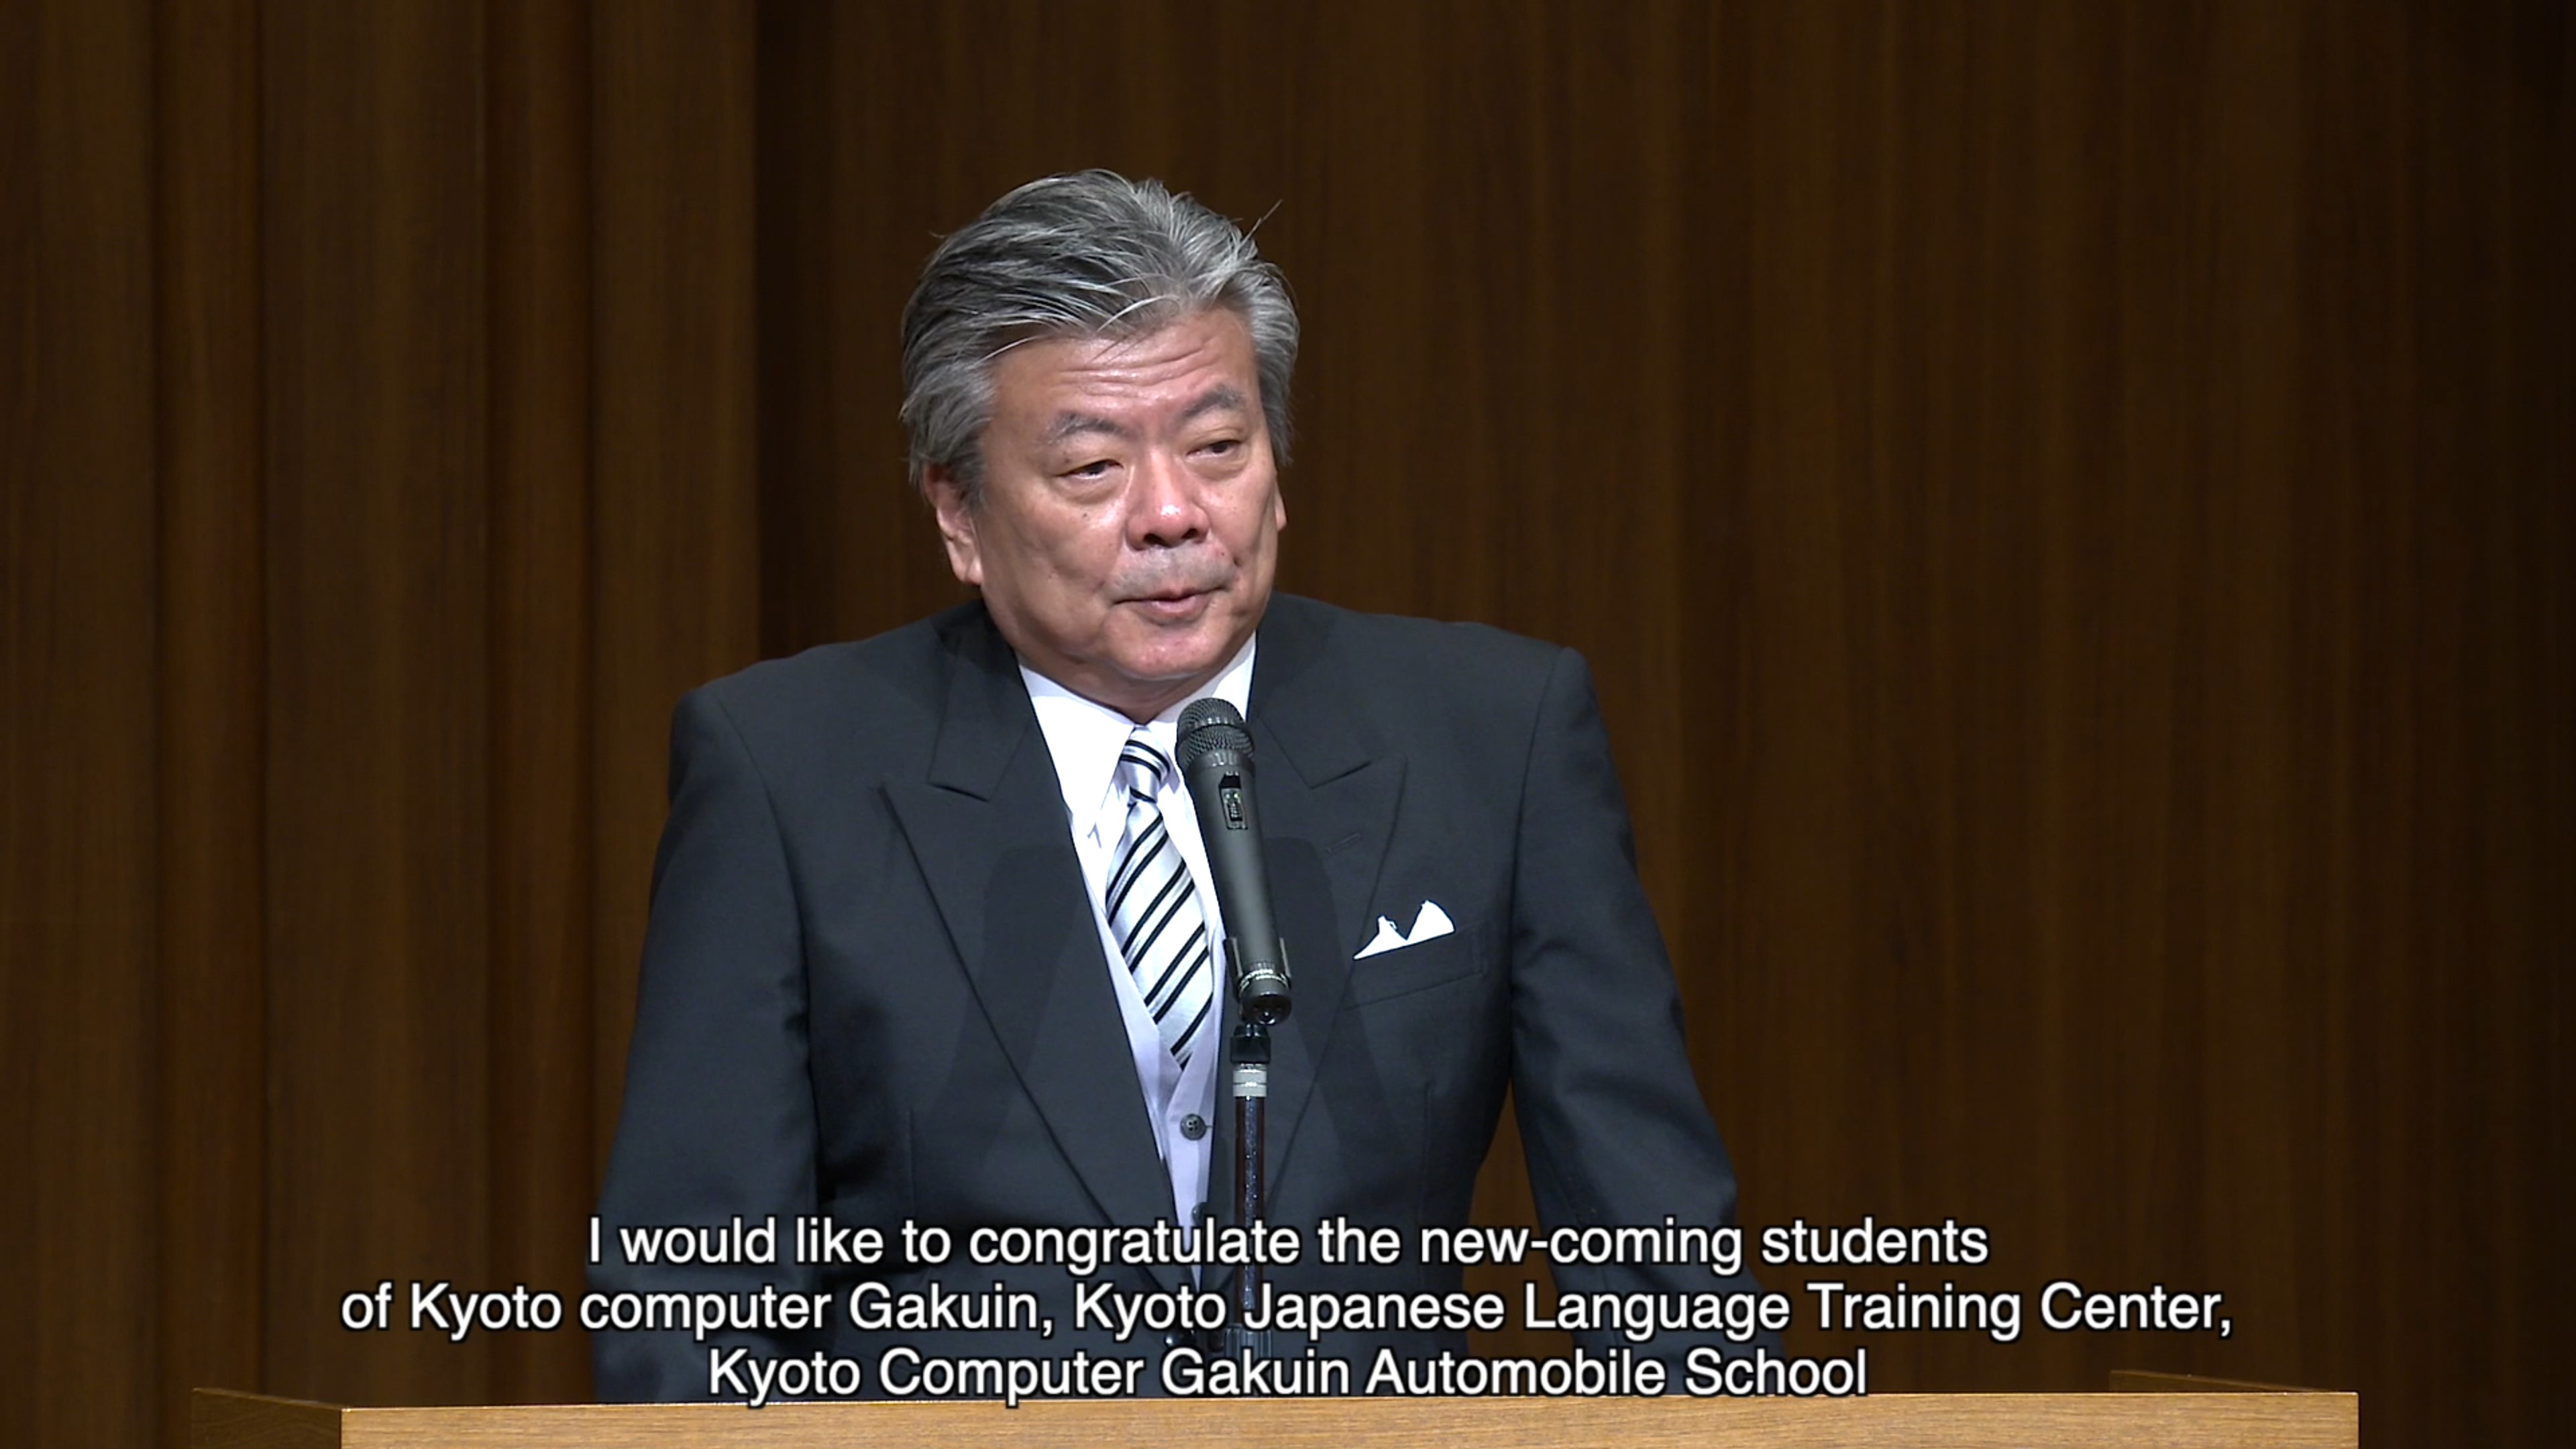 Wataru Hasegawa, KCG Group Chief Executive Officer, delivers his ceremonial address via video streaming.